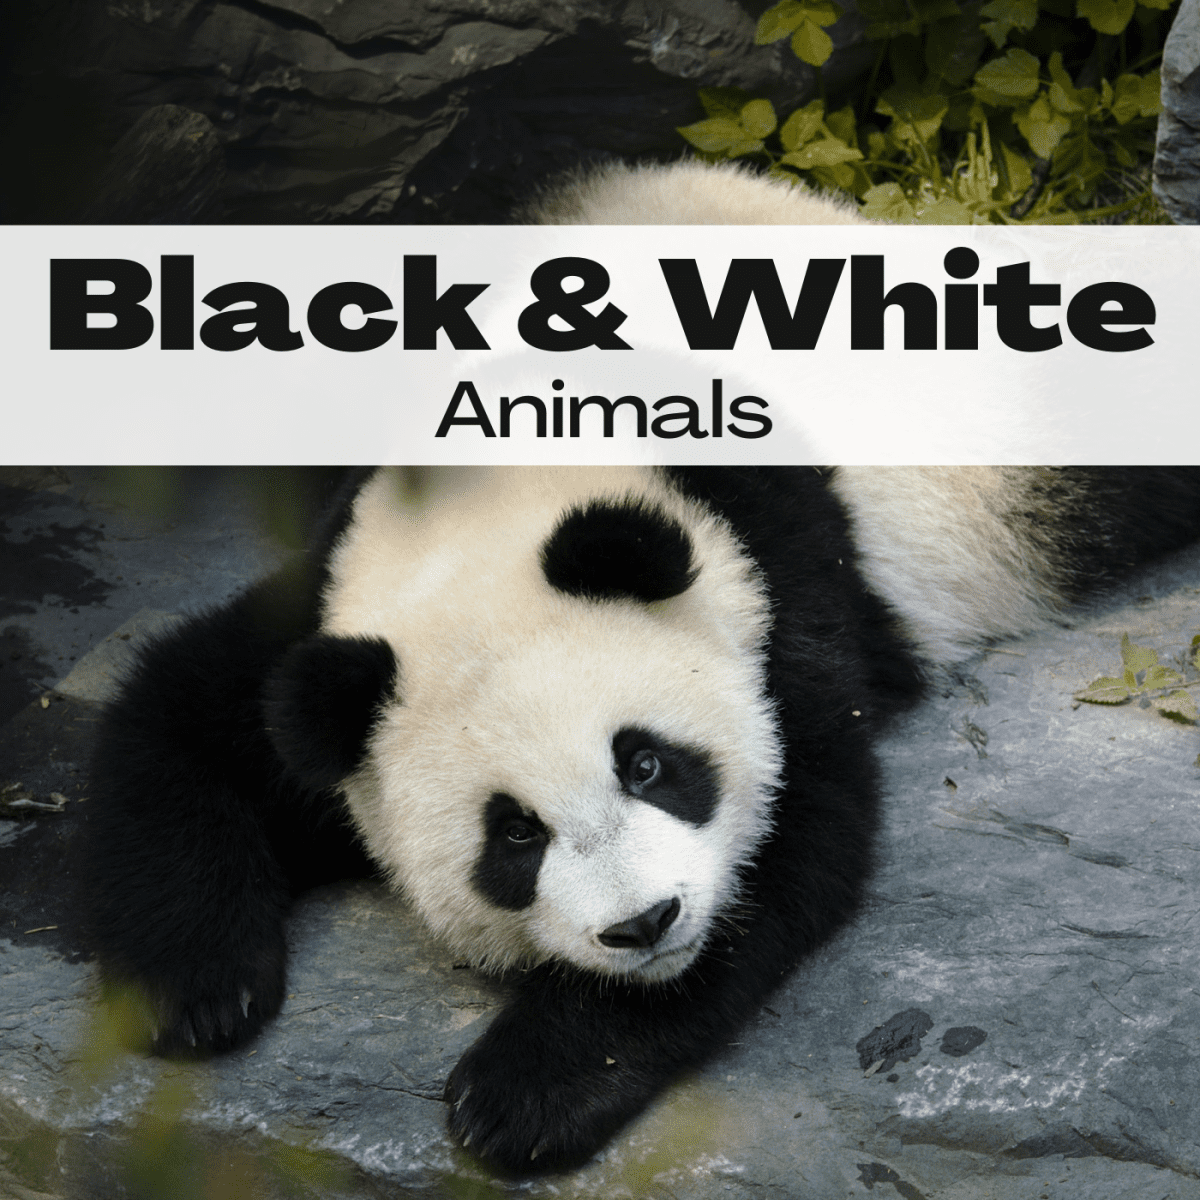 15 Black and White Animals (With Photos) - PetHelpful